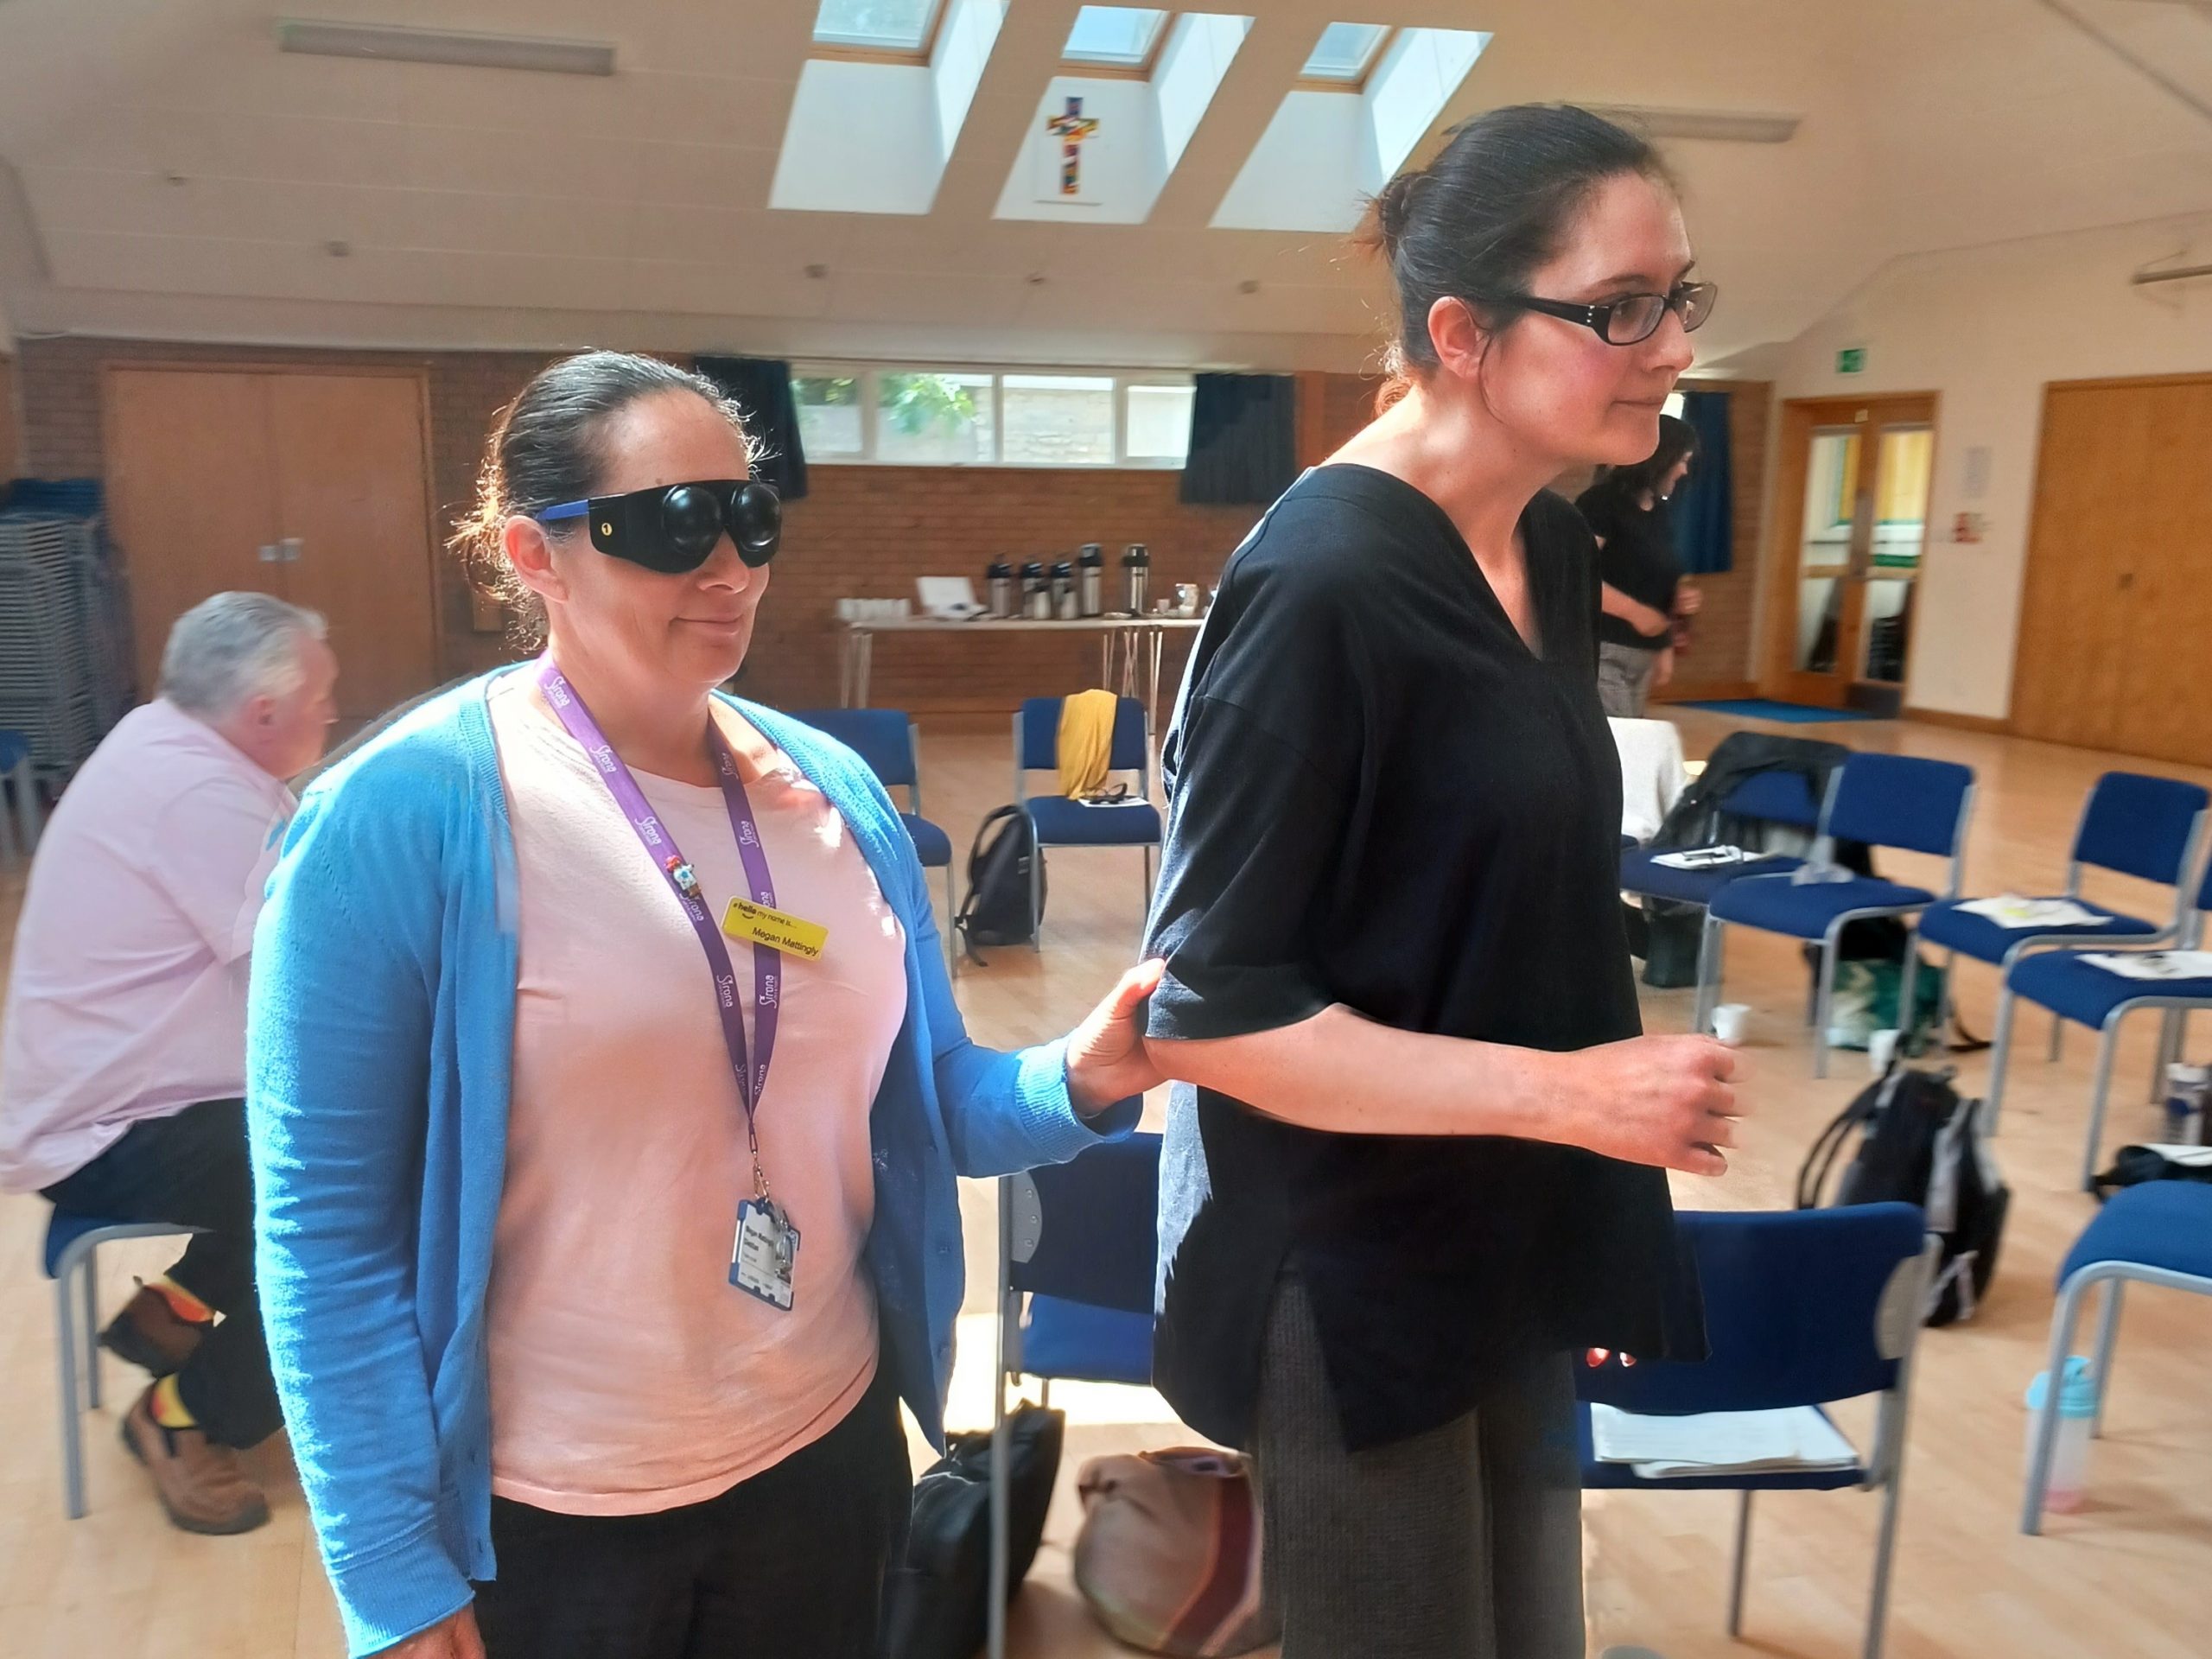 Two members of staff are participating in the sighted guide training. One member of staff is leading the other.